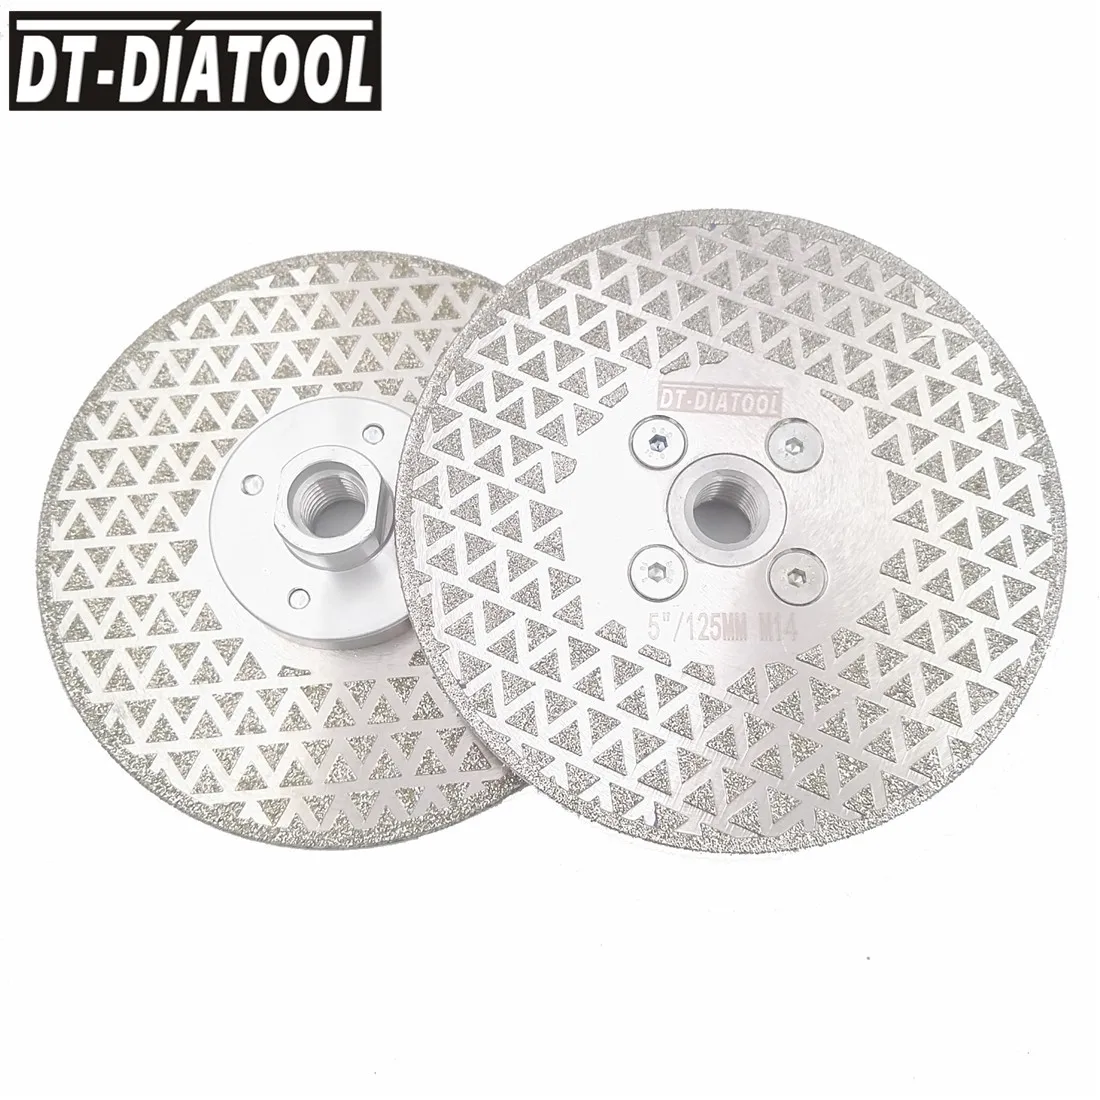 

1pc/2pcs Electroplated Diamond Cutting Disc Grinding Wheel Both Side Coated Saw Blade for Cutting Marble Tile M14 Thread